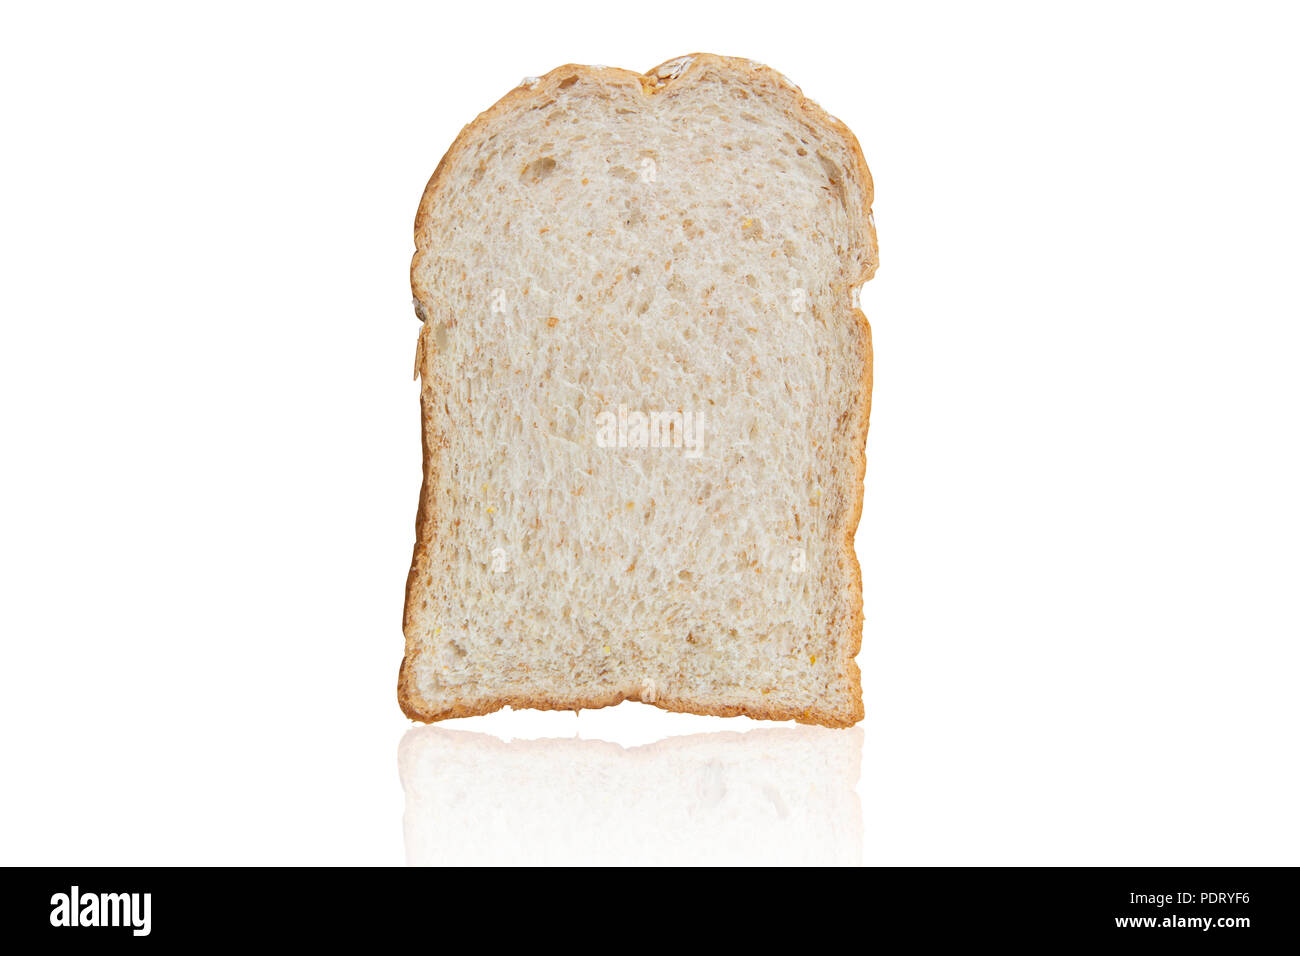 whole grain wheat bread isolated on white with clipping path Stock Photo